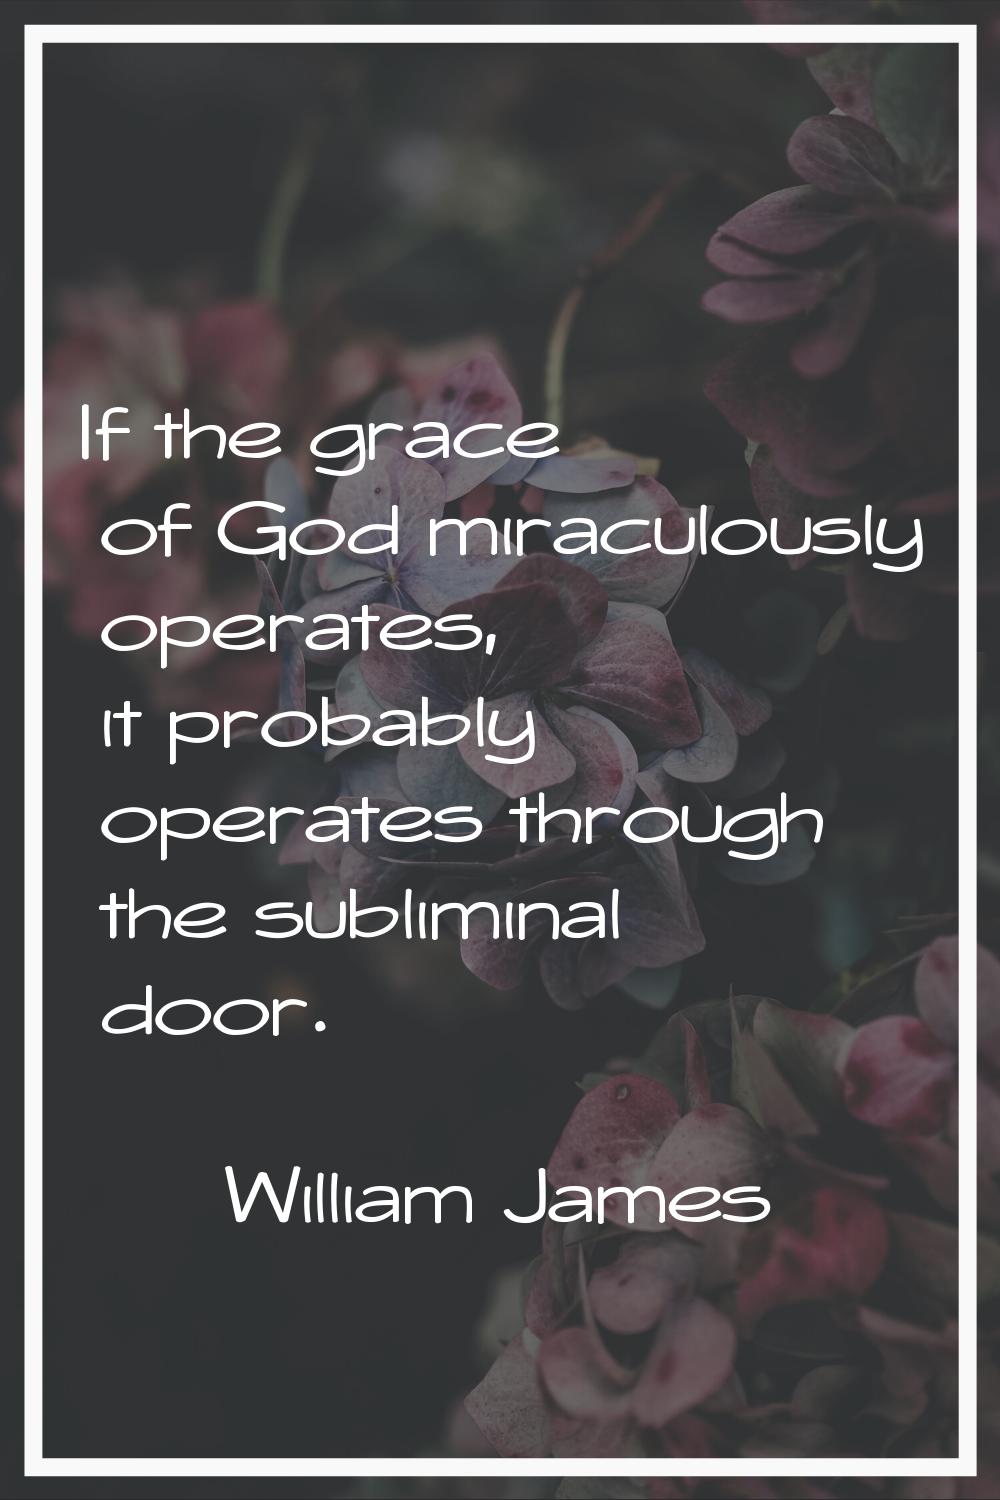 If the grace of God miraculously operates, it probably operates through the subliminal door.